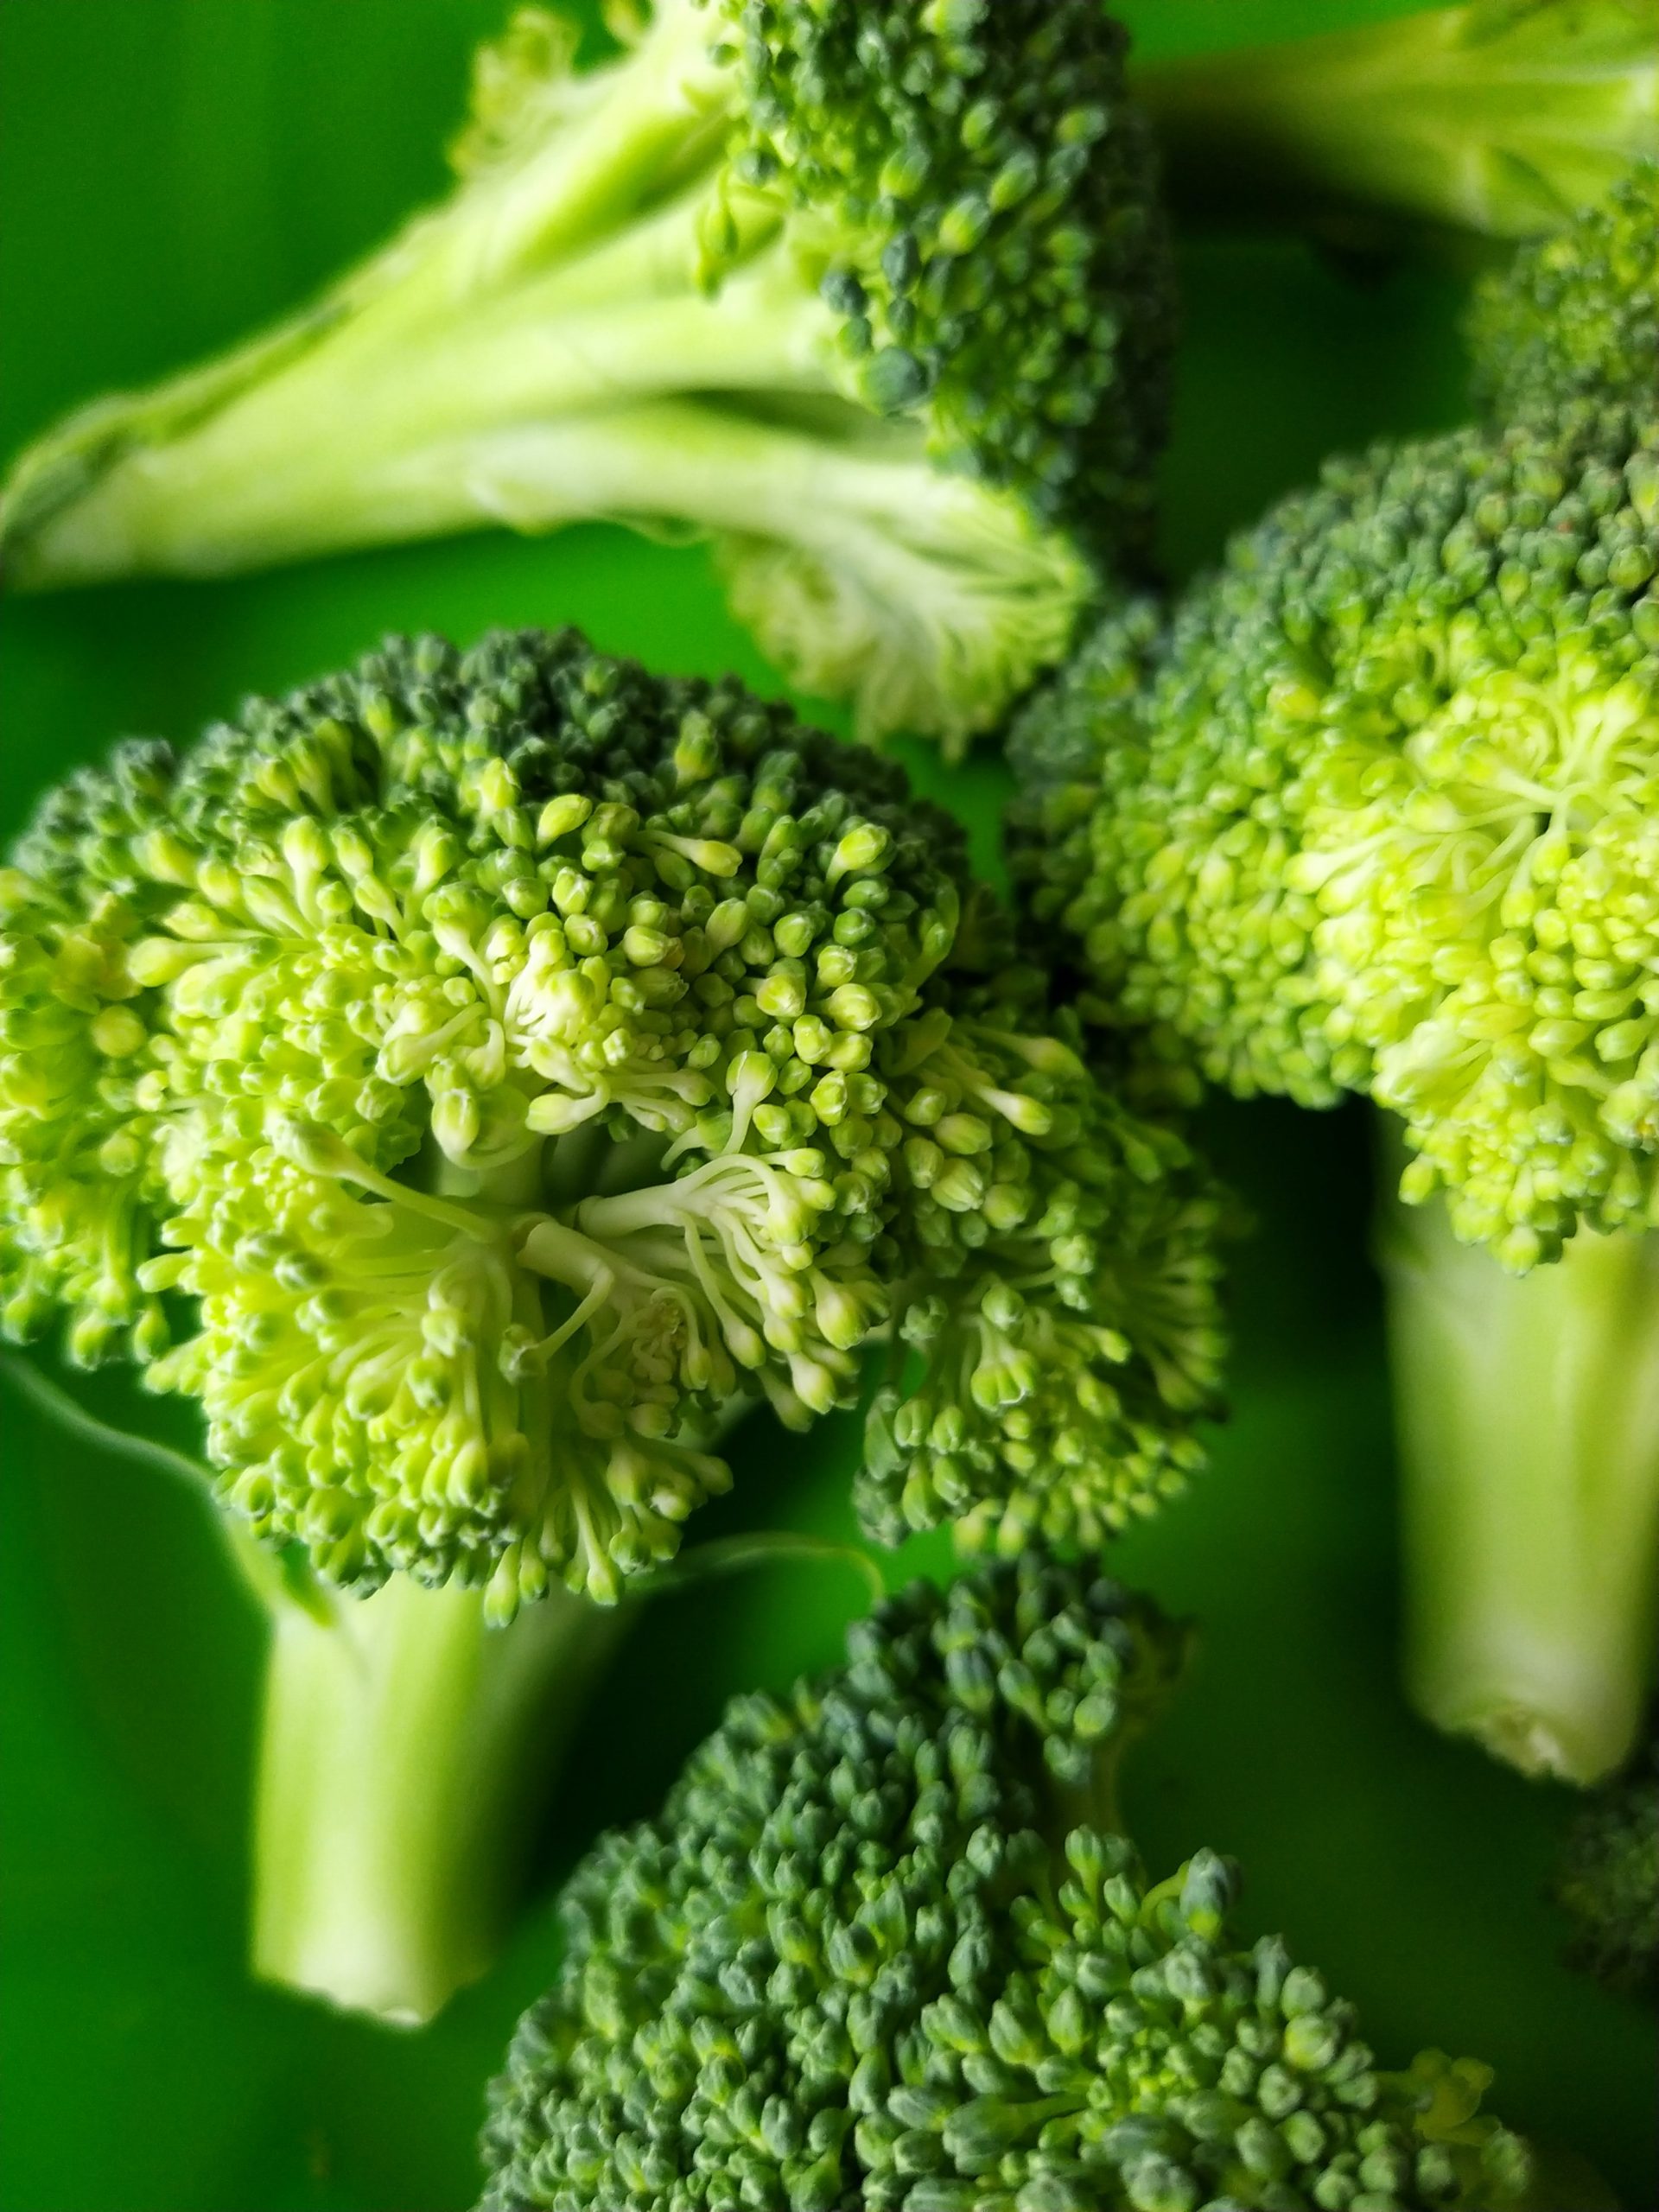 How Many Florets In A Head Of Broccoli?